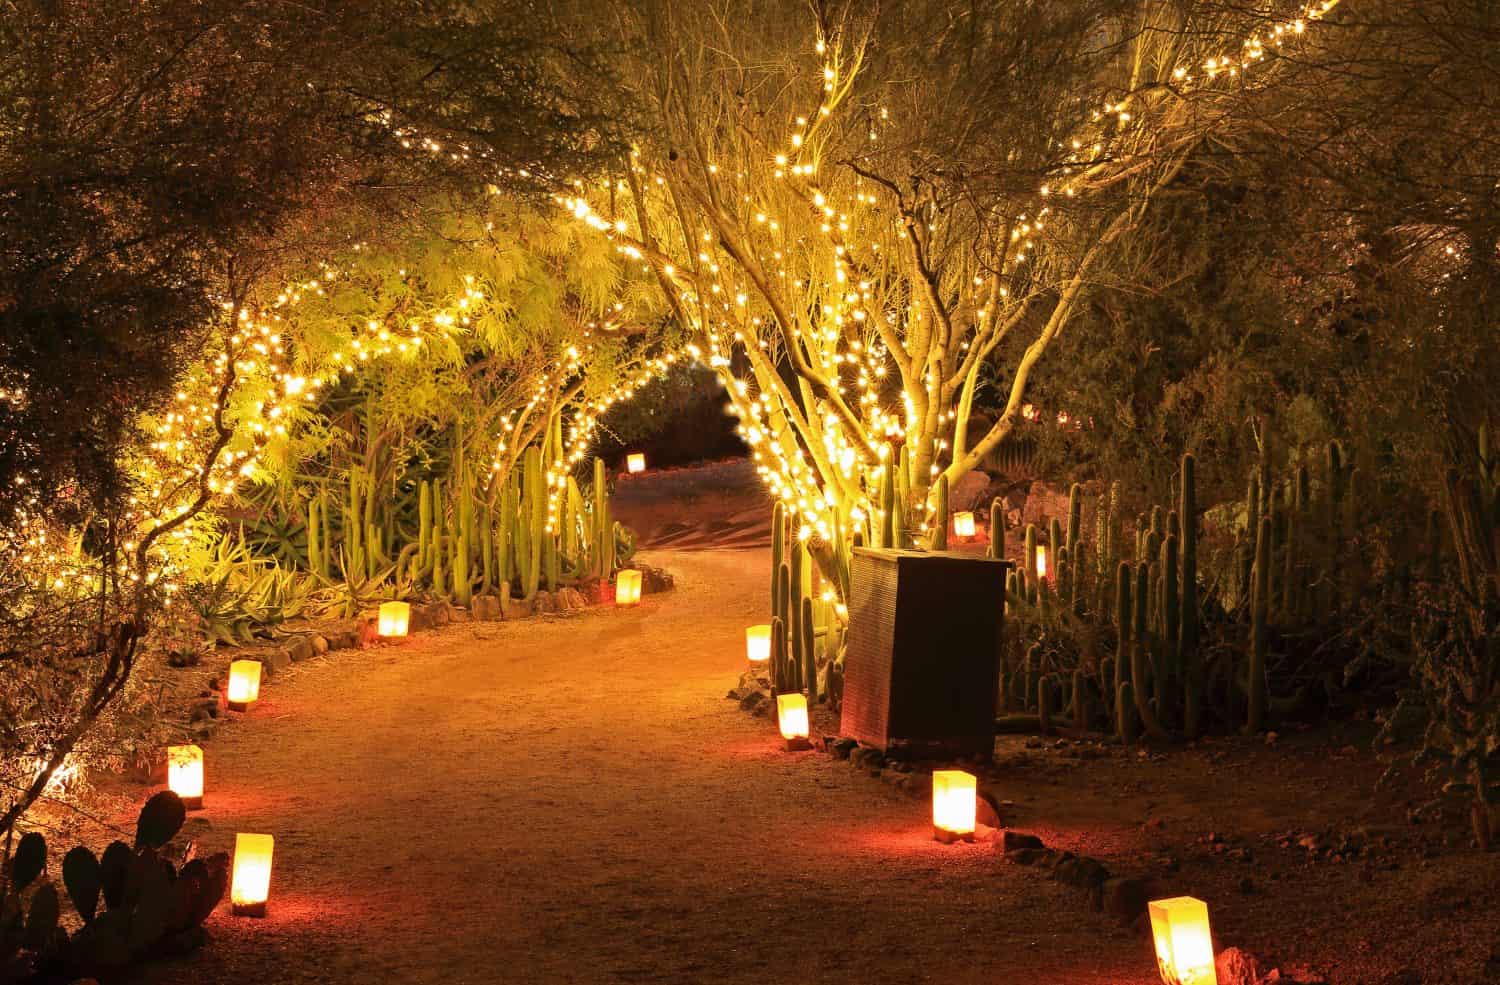 Luminarias and tree lights create a festive Christmas atmosphere in this Southwestern garden night scene.